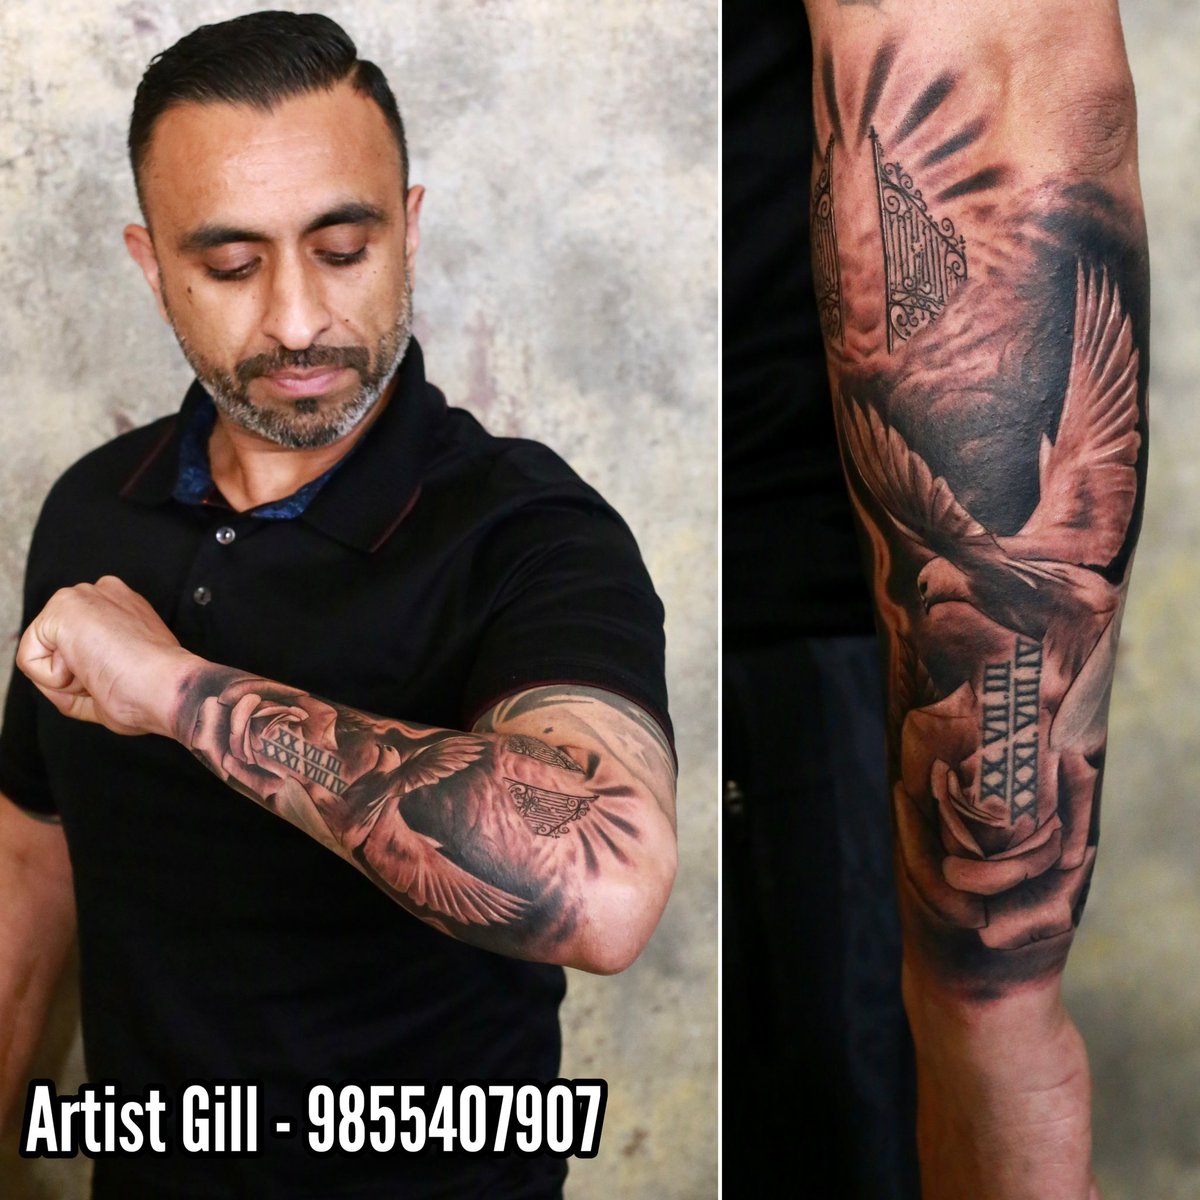 Famous Tattooer Artist Gill Reveals What He Loves The Most About Tattooing